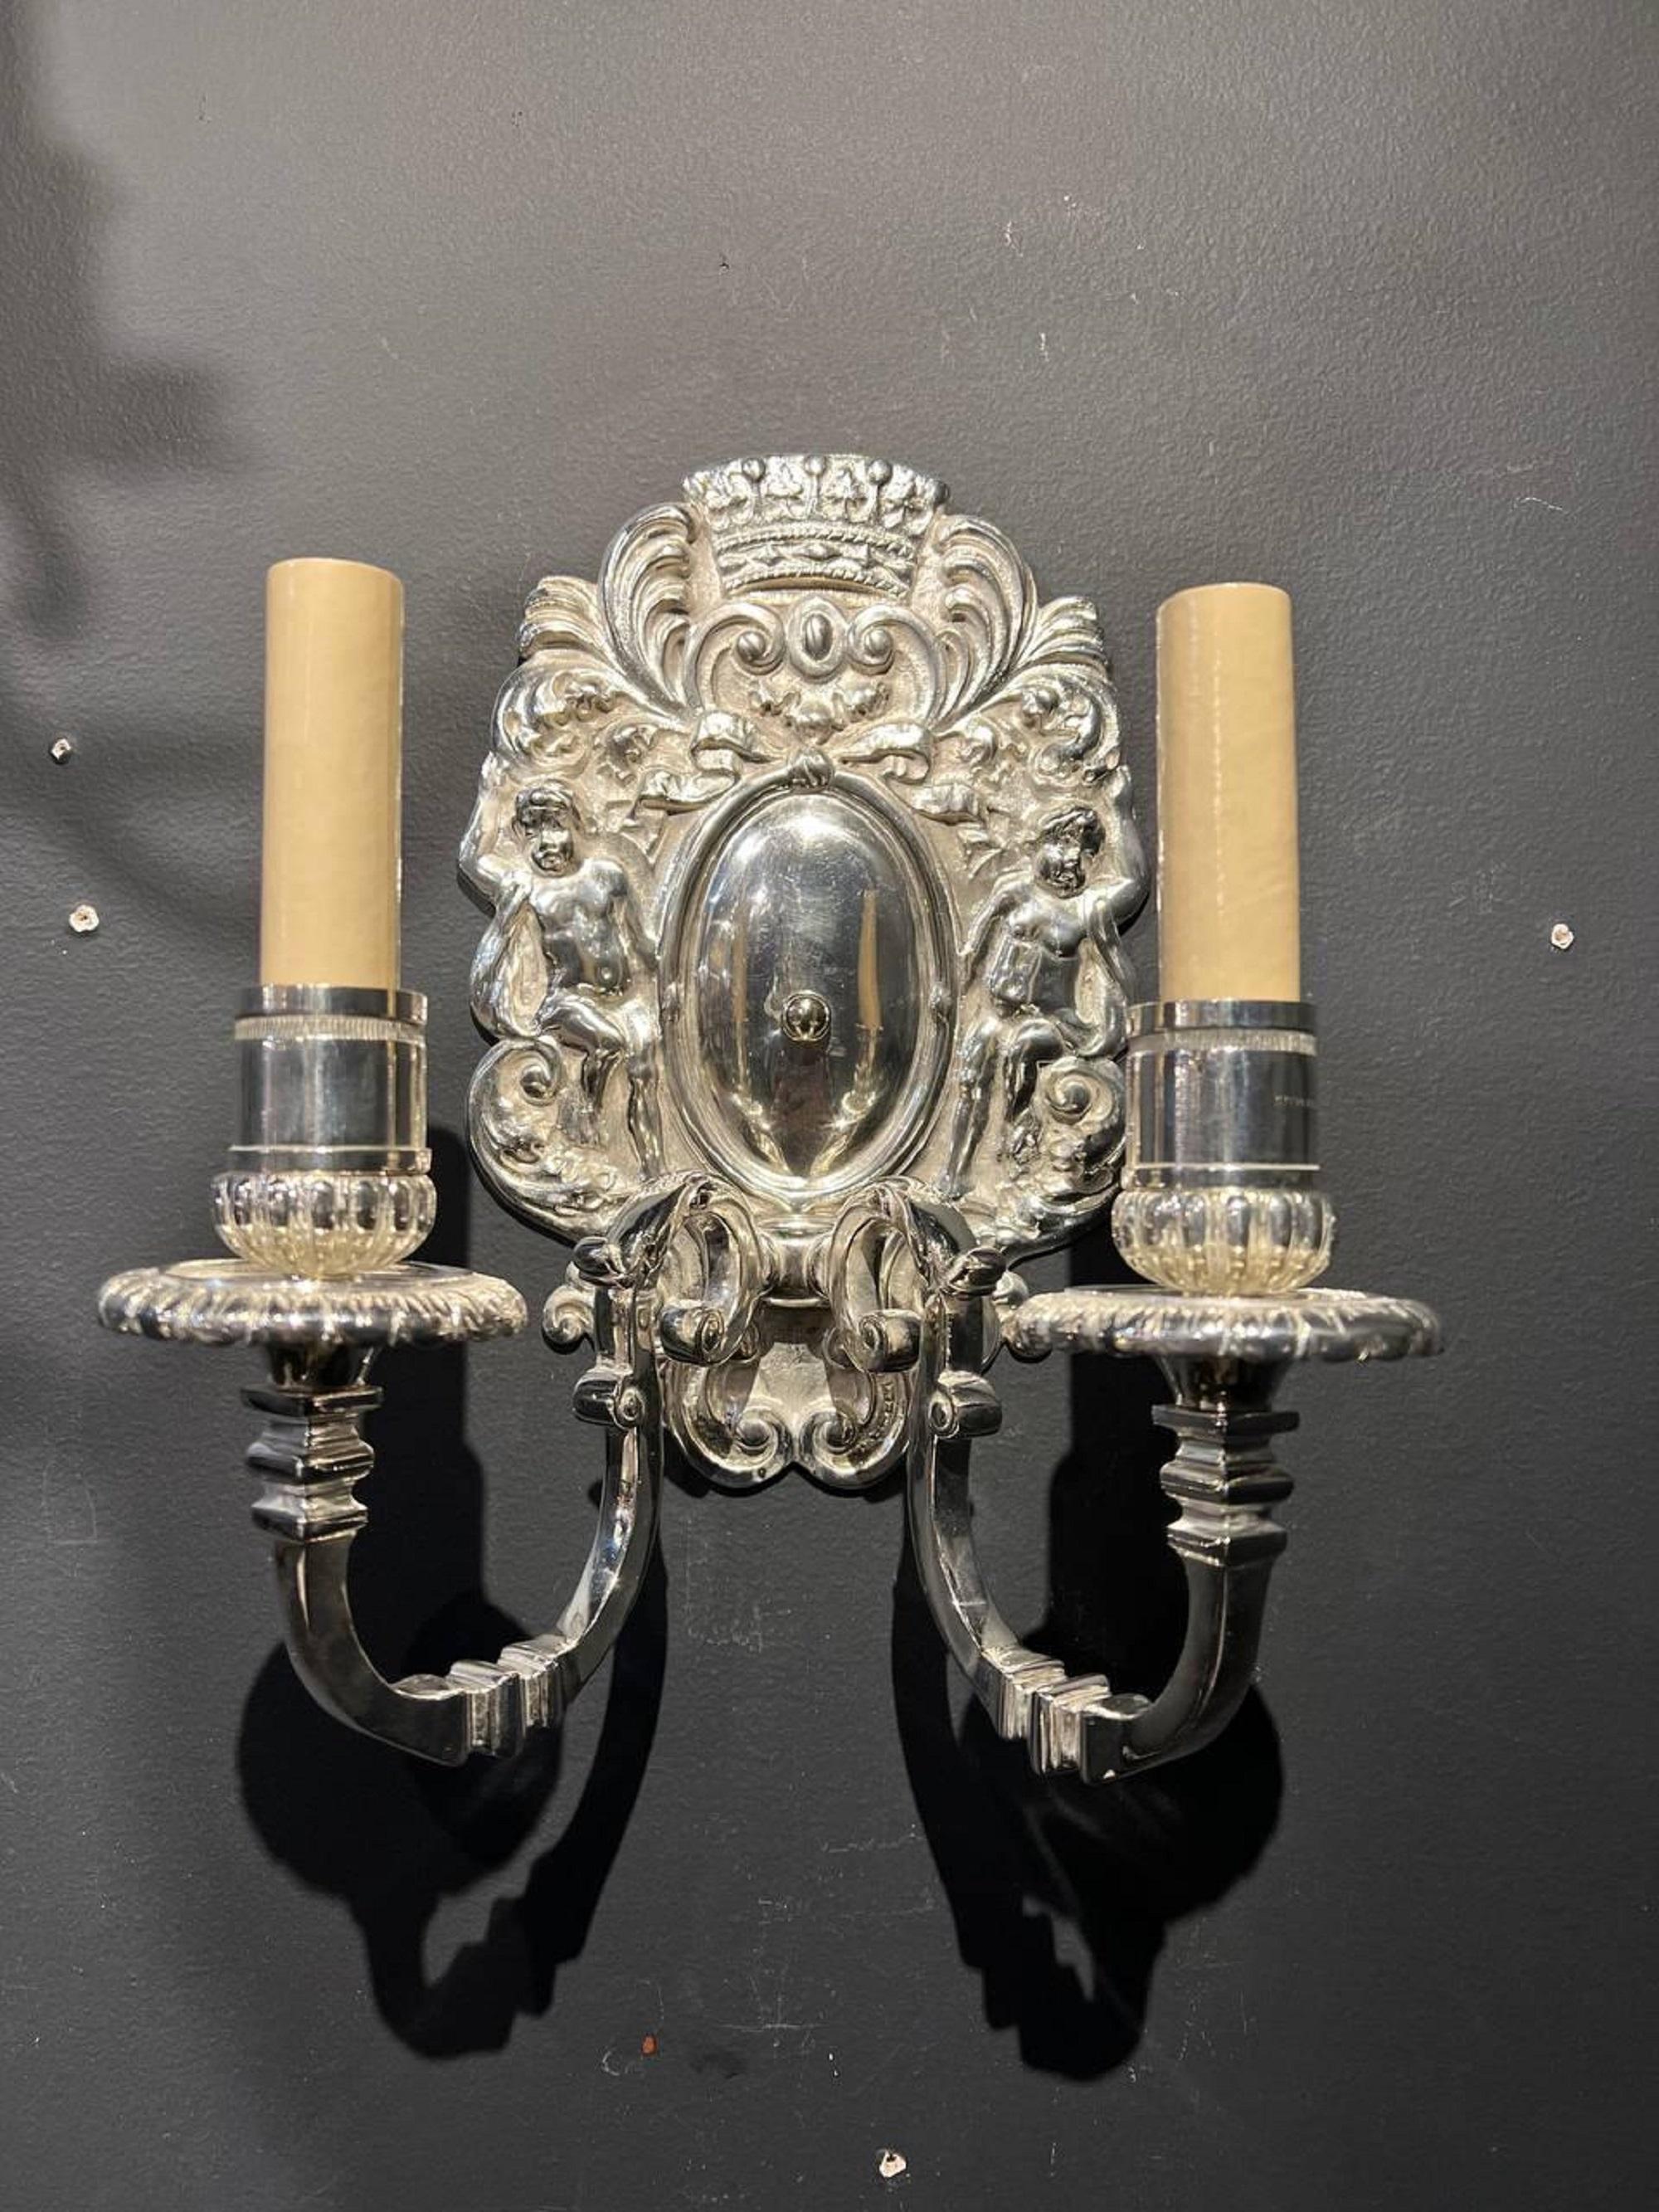 A pair of circa 1920’s silver plated sconces with cherubs on plate design and two lights.

Dealer: G302YP